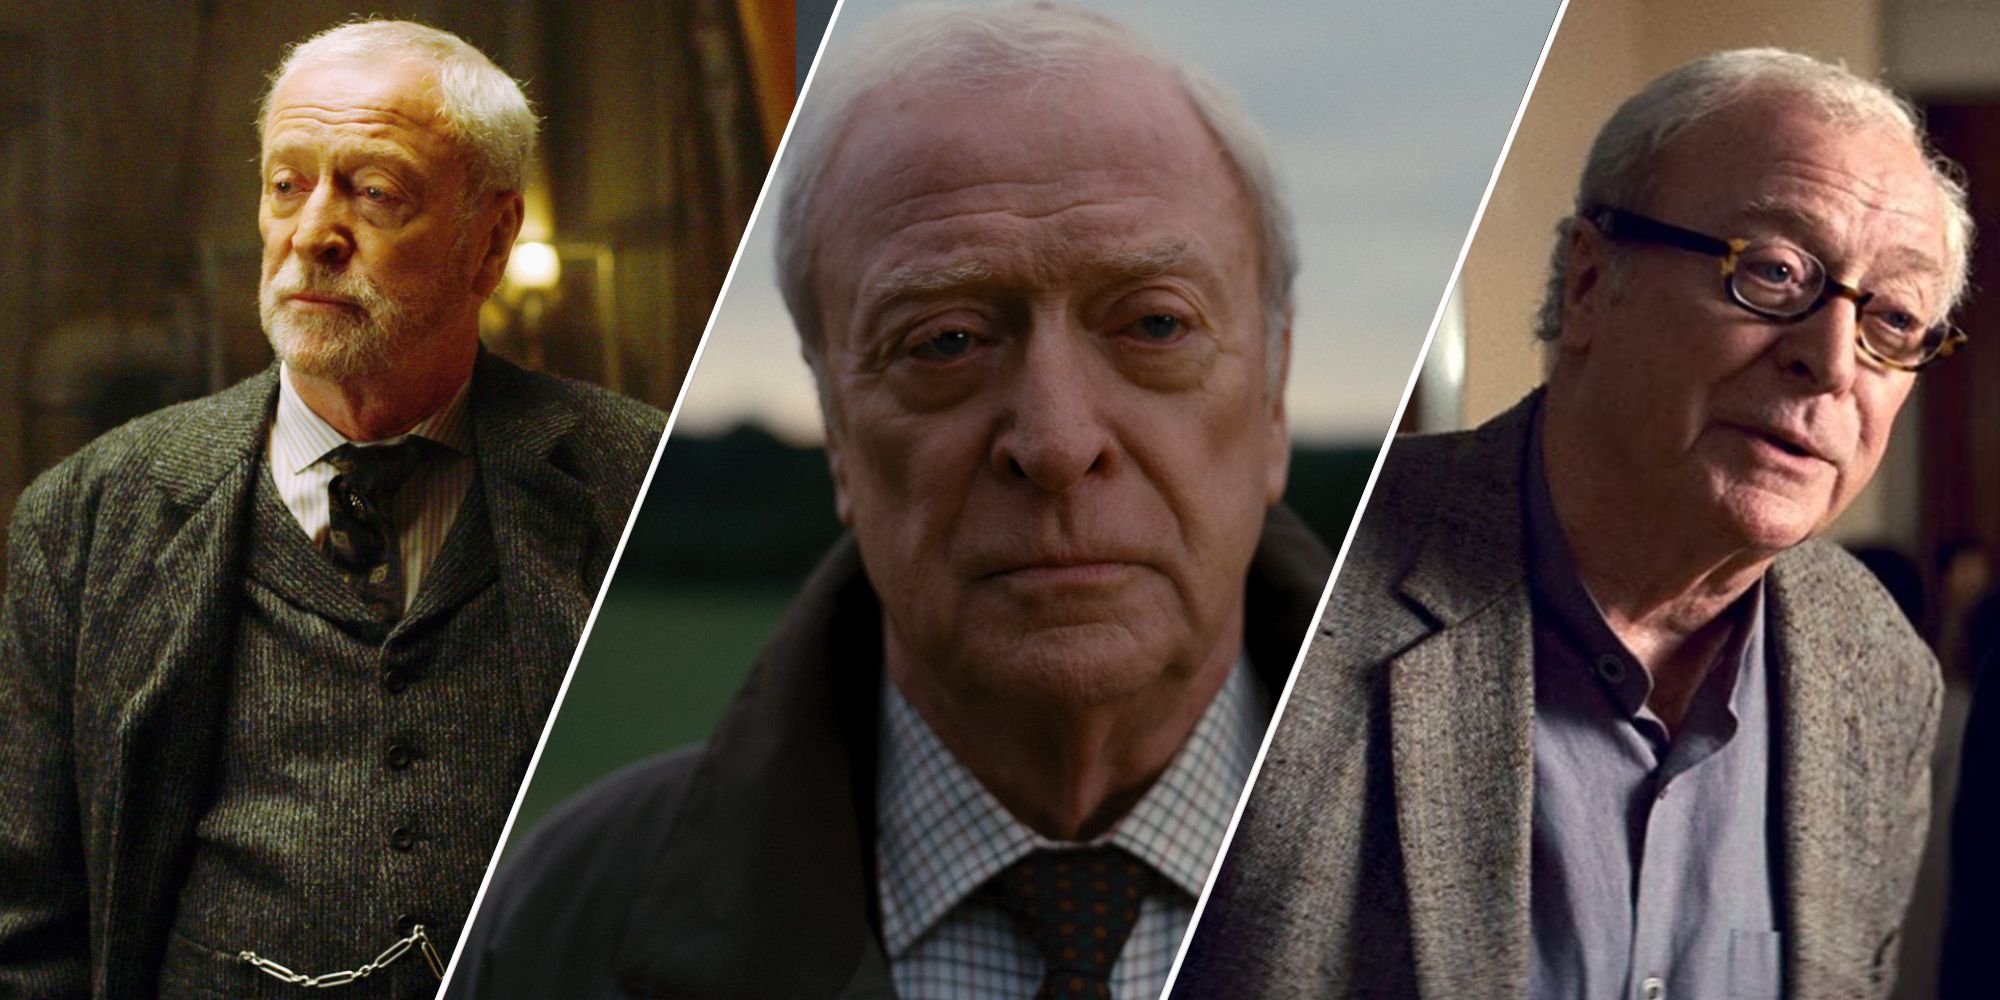 Michael Caine through the years